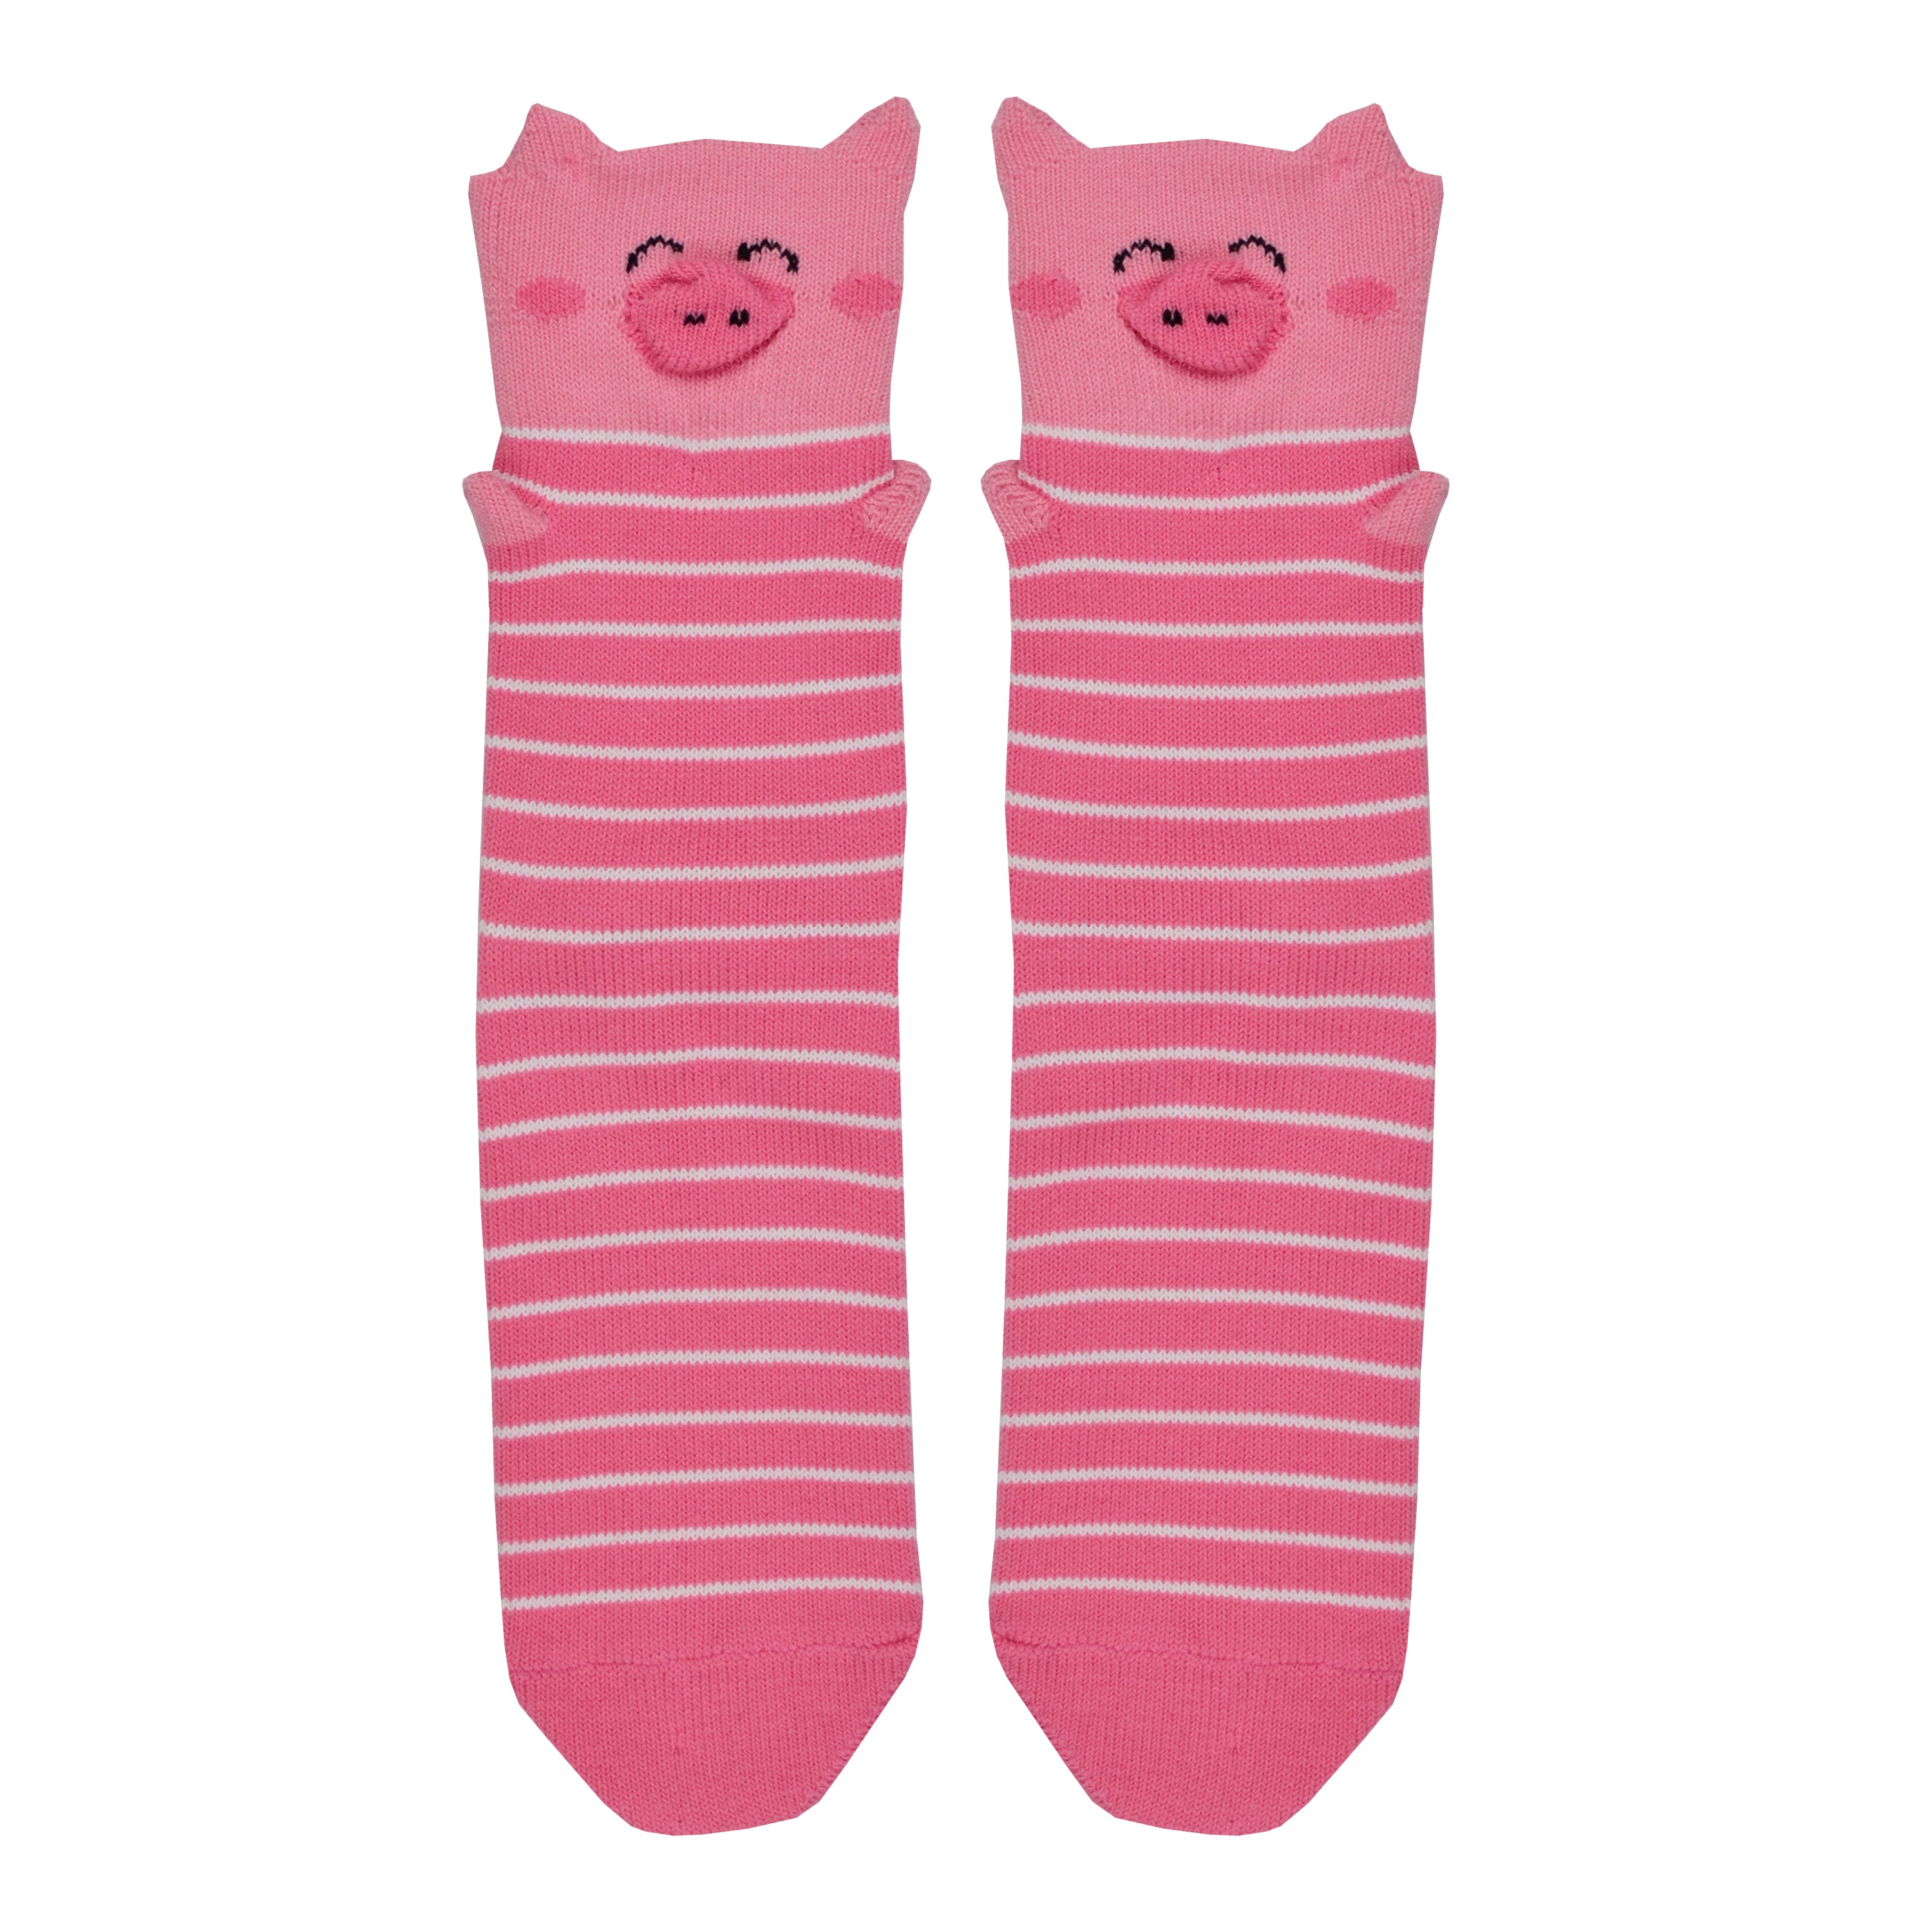 Shown in a flatlay, a pair of Foot Traffic, pink and white cotton women's crew socks with three dimensional pattern of cute pig